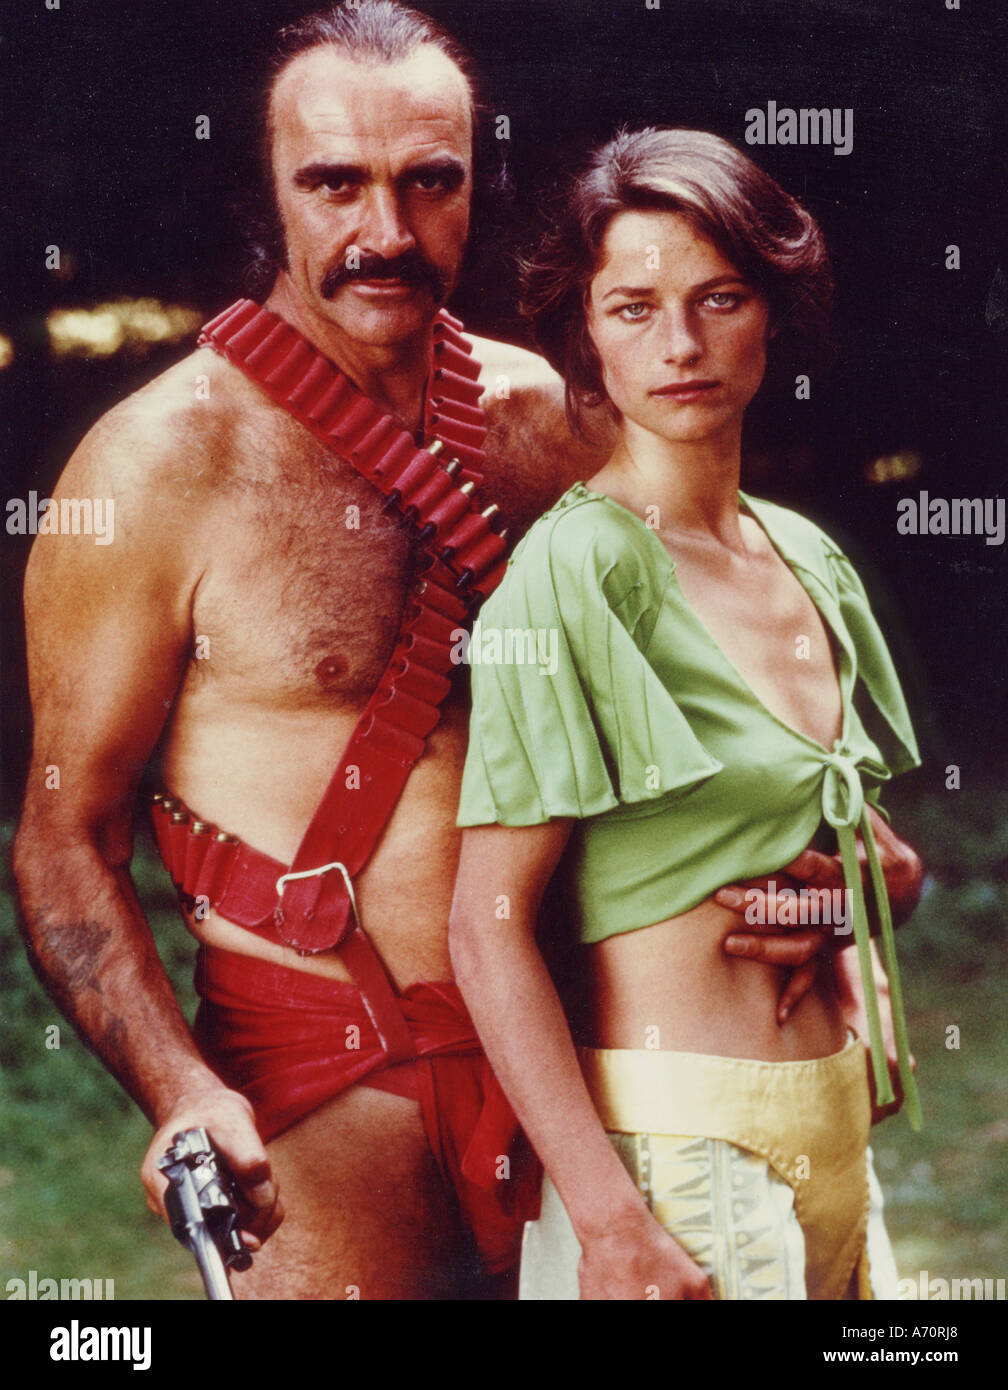 ZARDOZ  1974 TCF film with Sean Connery and Charlotte Rampling Stock Photo